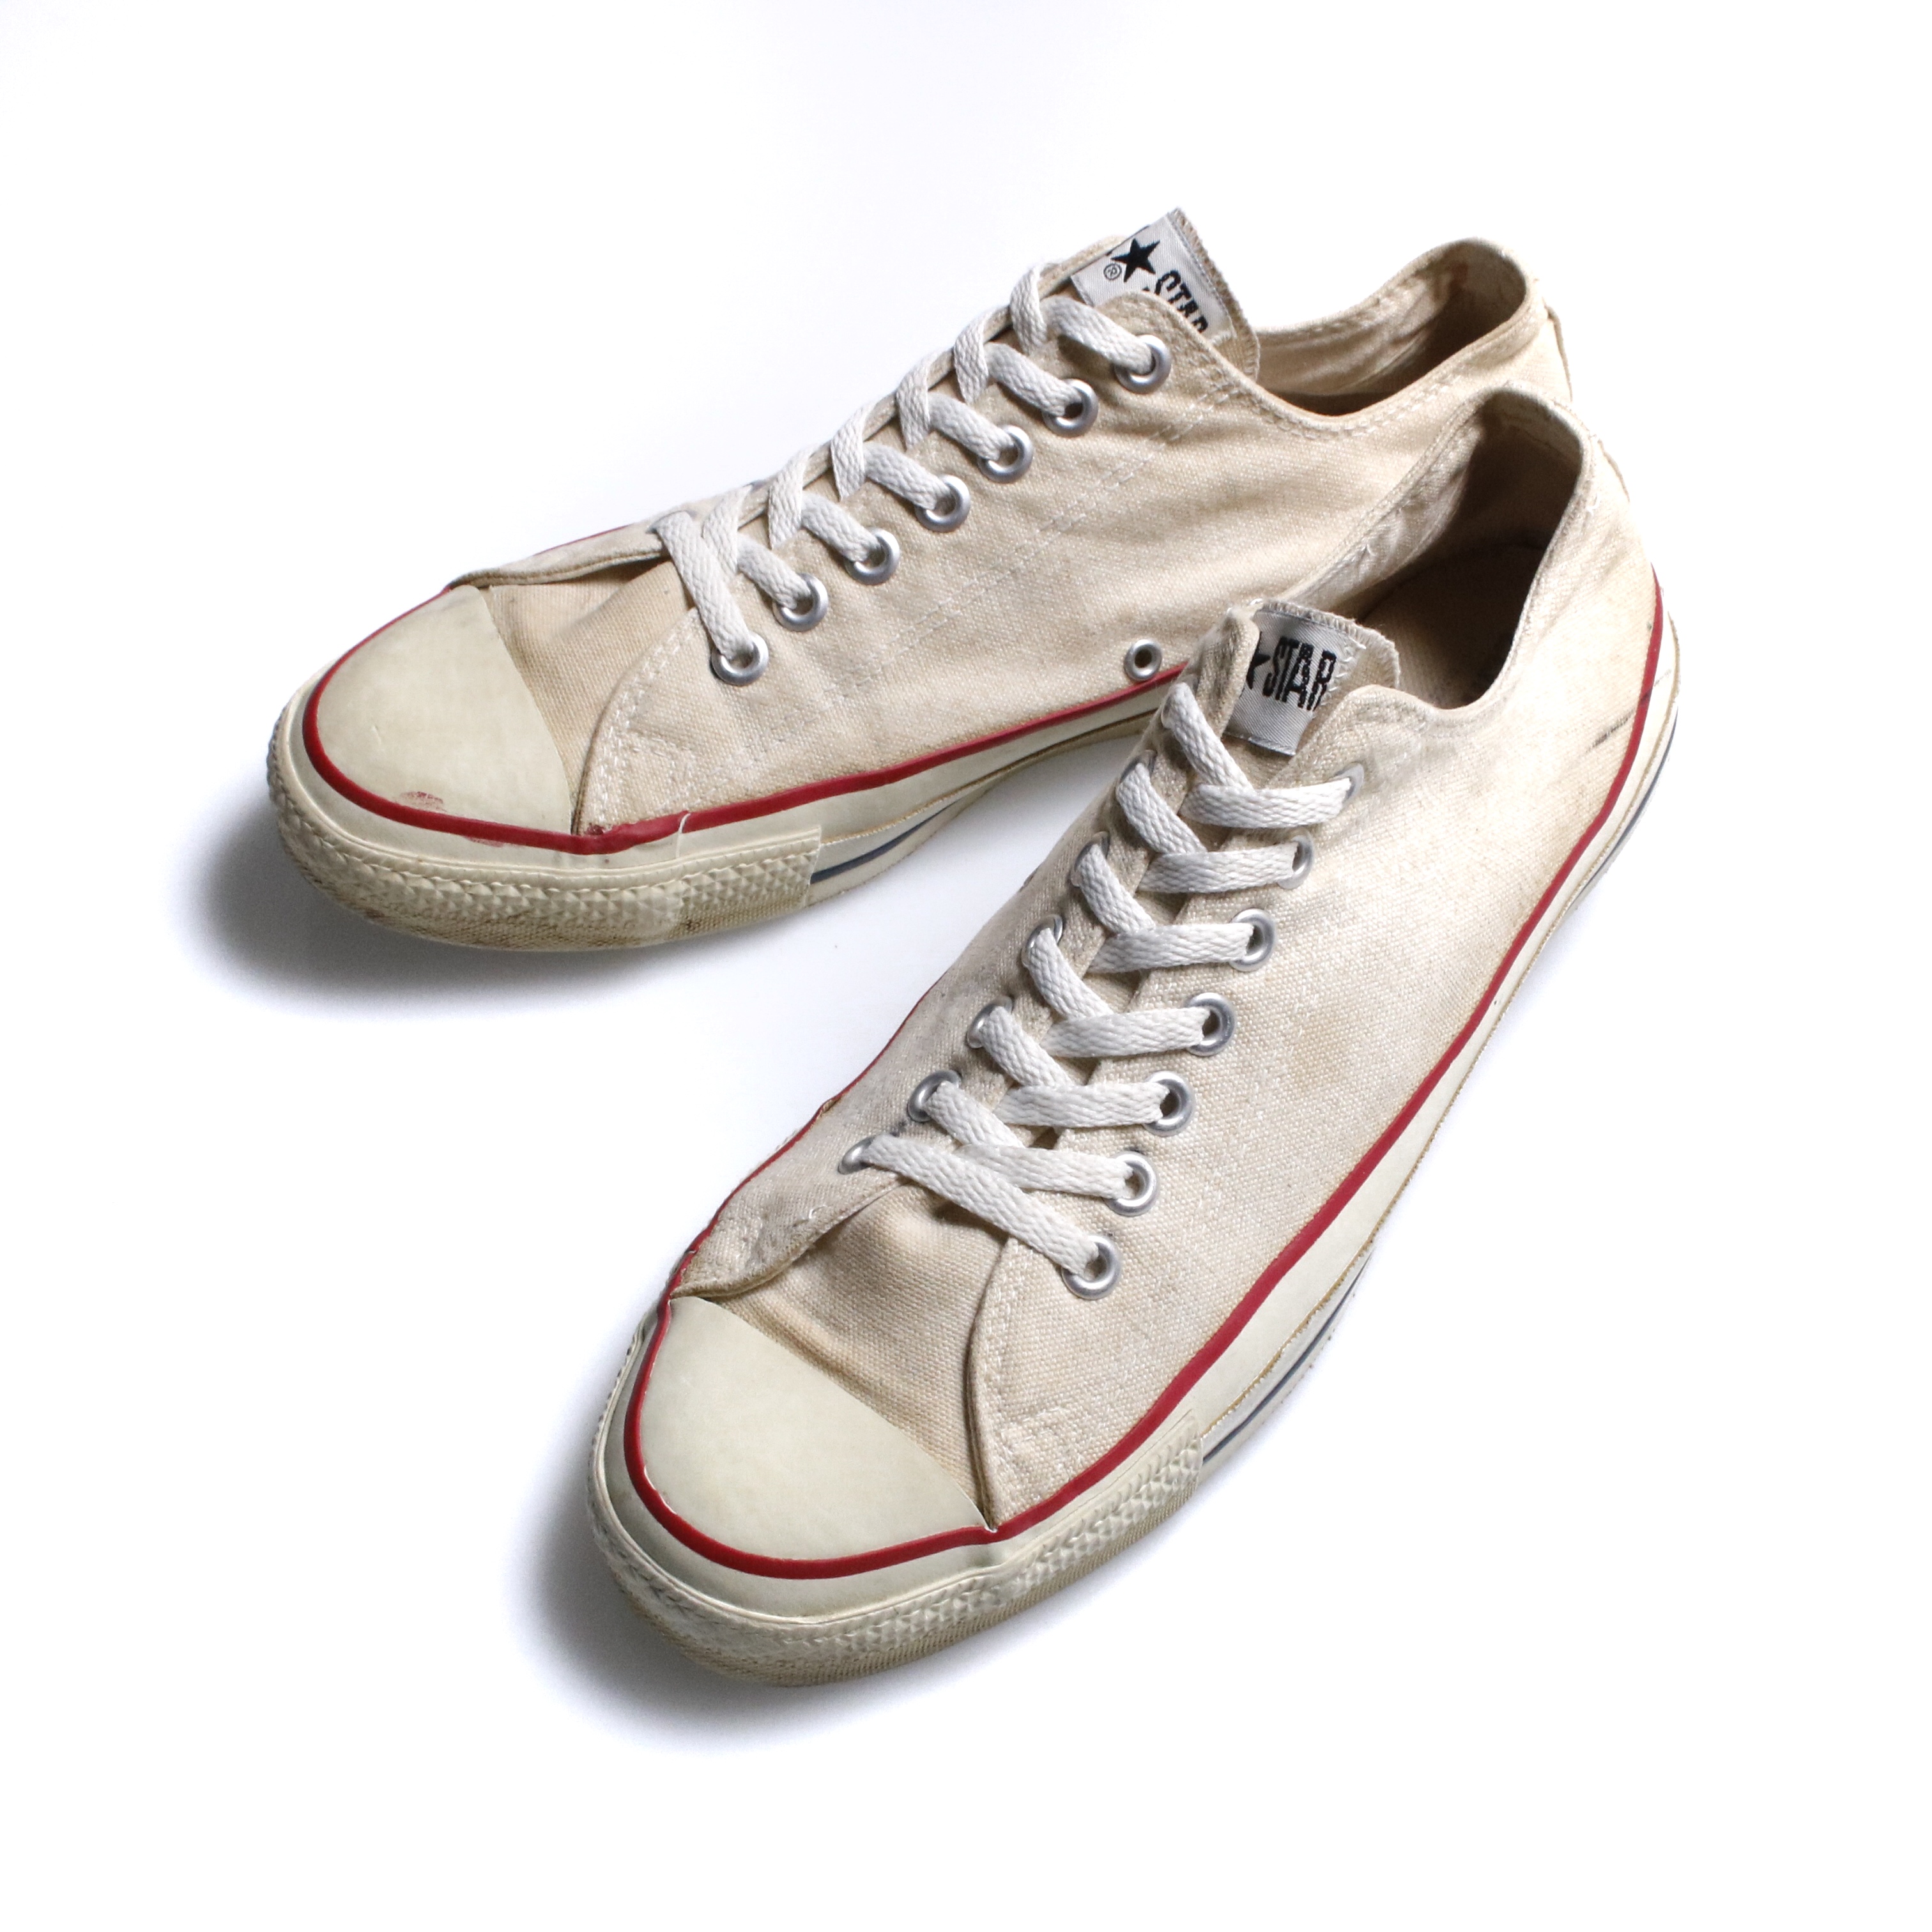 90s  USA製 ヴィンテージ CONVERSE All star low